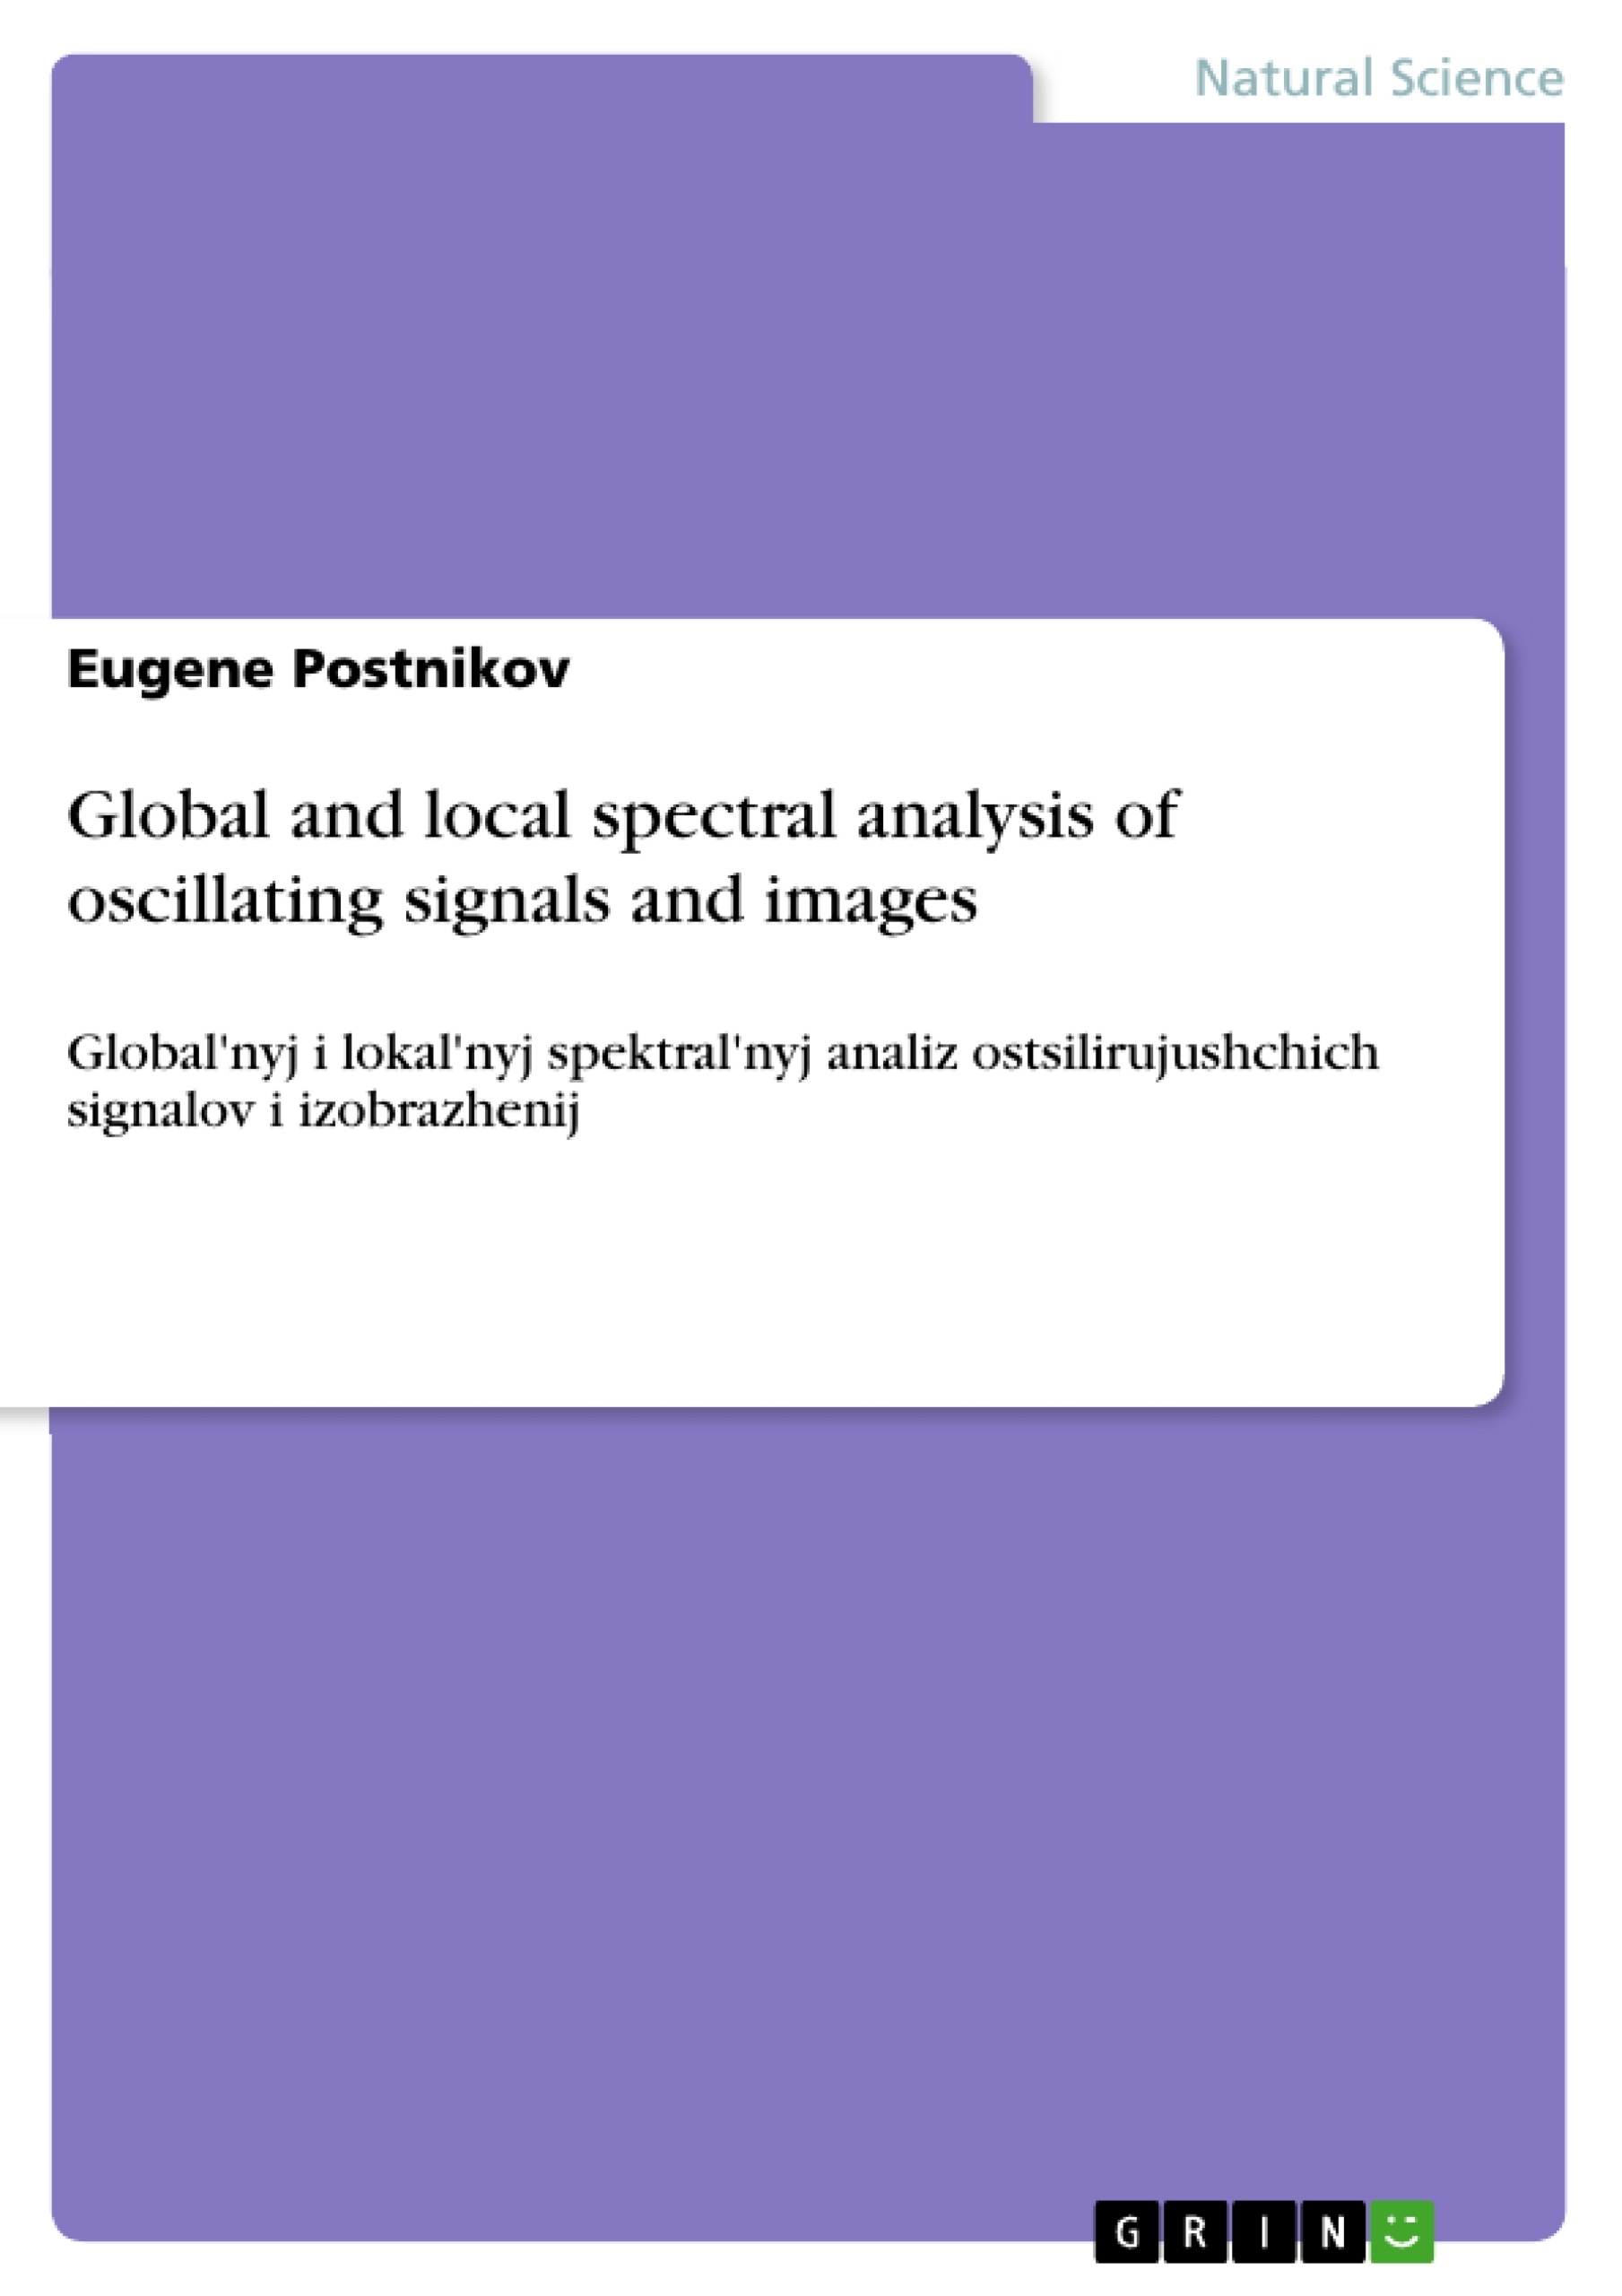 Titre: Global and local spectral analysis of oscillating signals and images